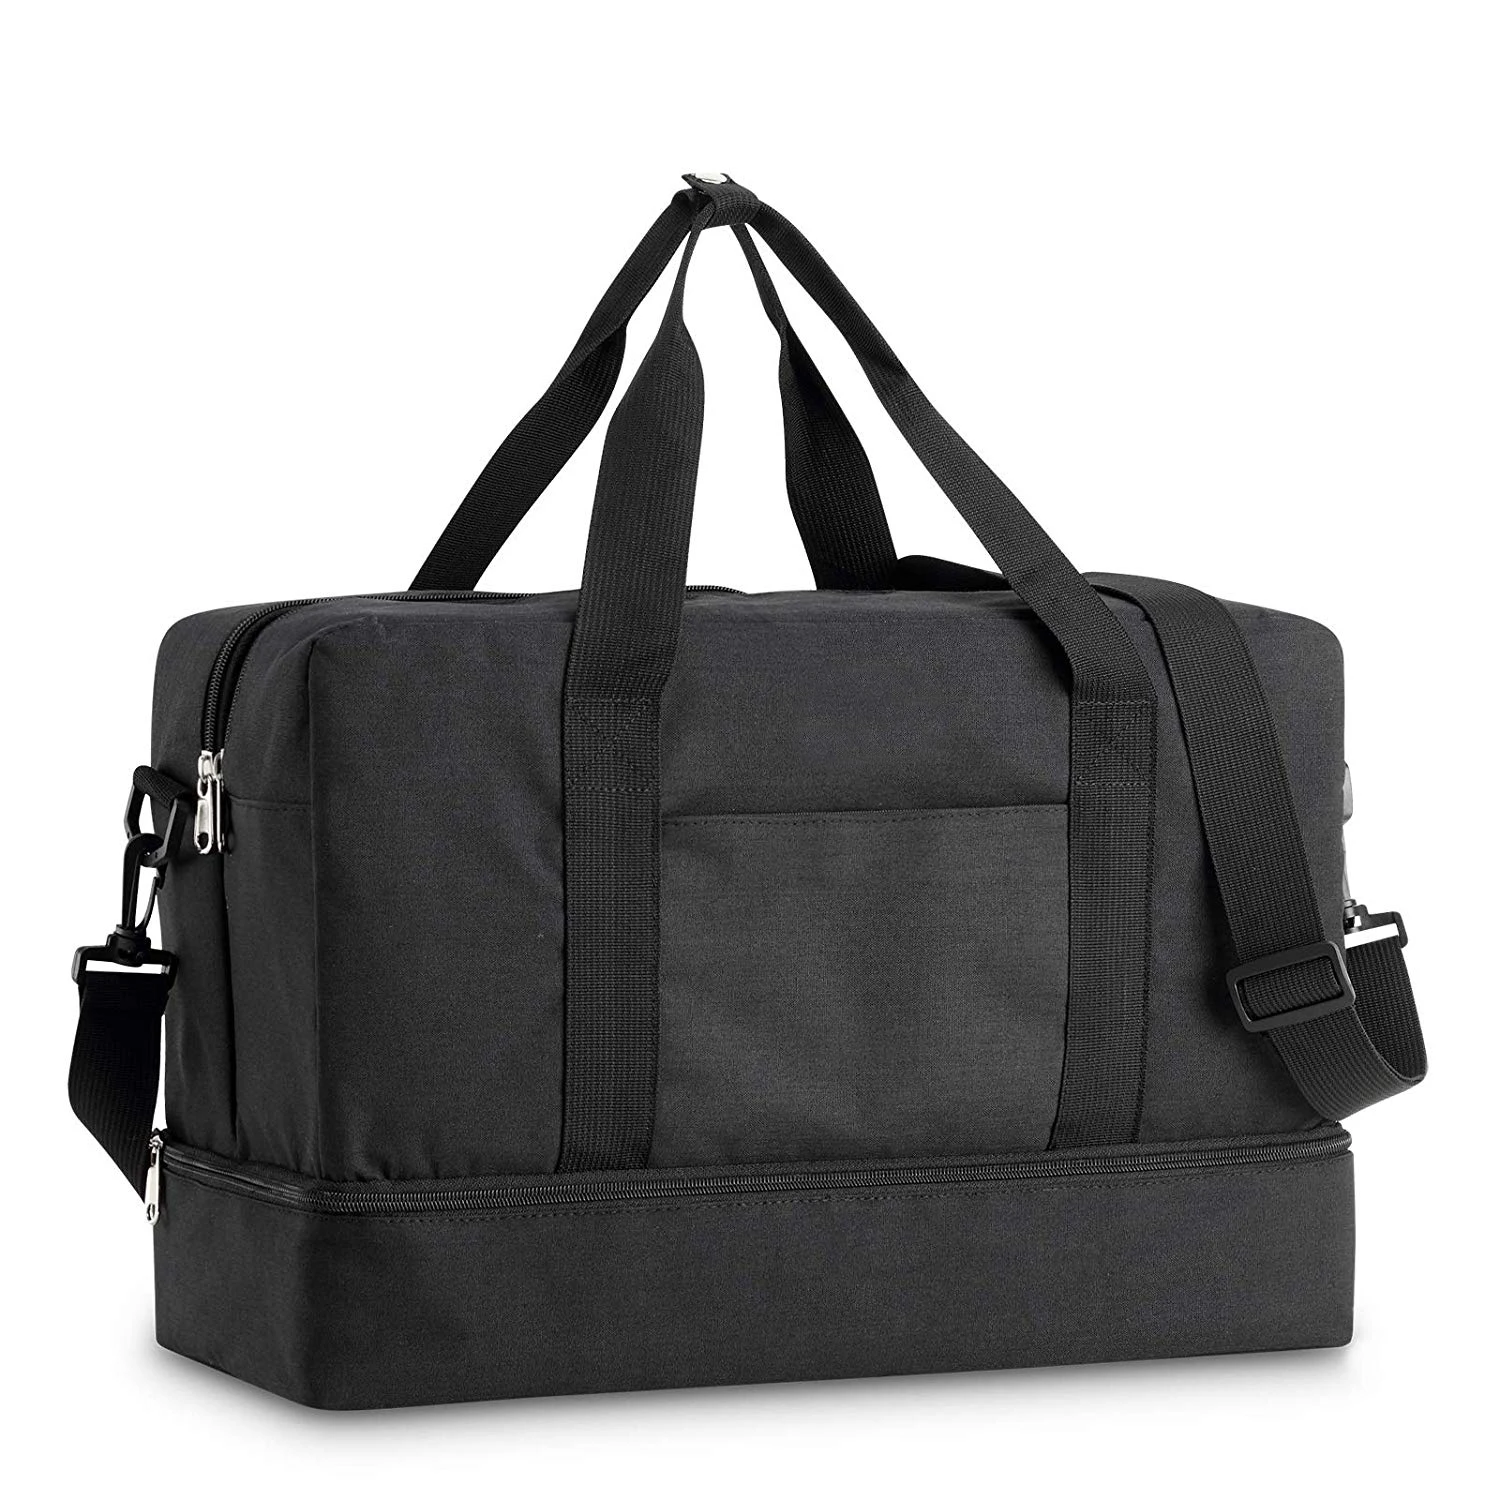 

Waterproof Travel Duffel Bag Sports Gym Bag Sports Bag for Man Duffle 1pc/poly Bag + Carton Polyester , Nylon Fashion 5-7days, Black , customized color is available